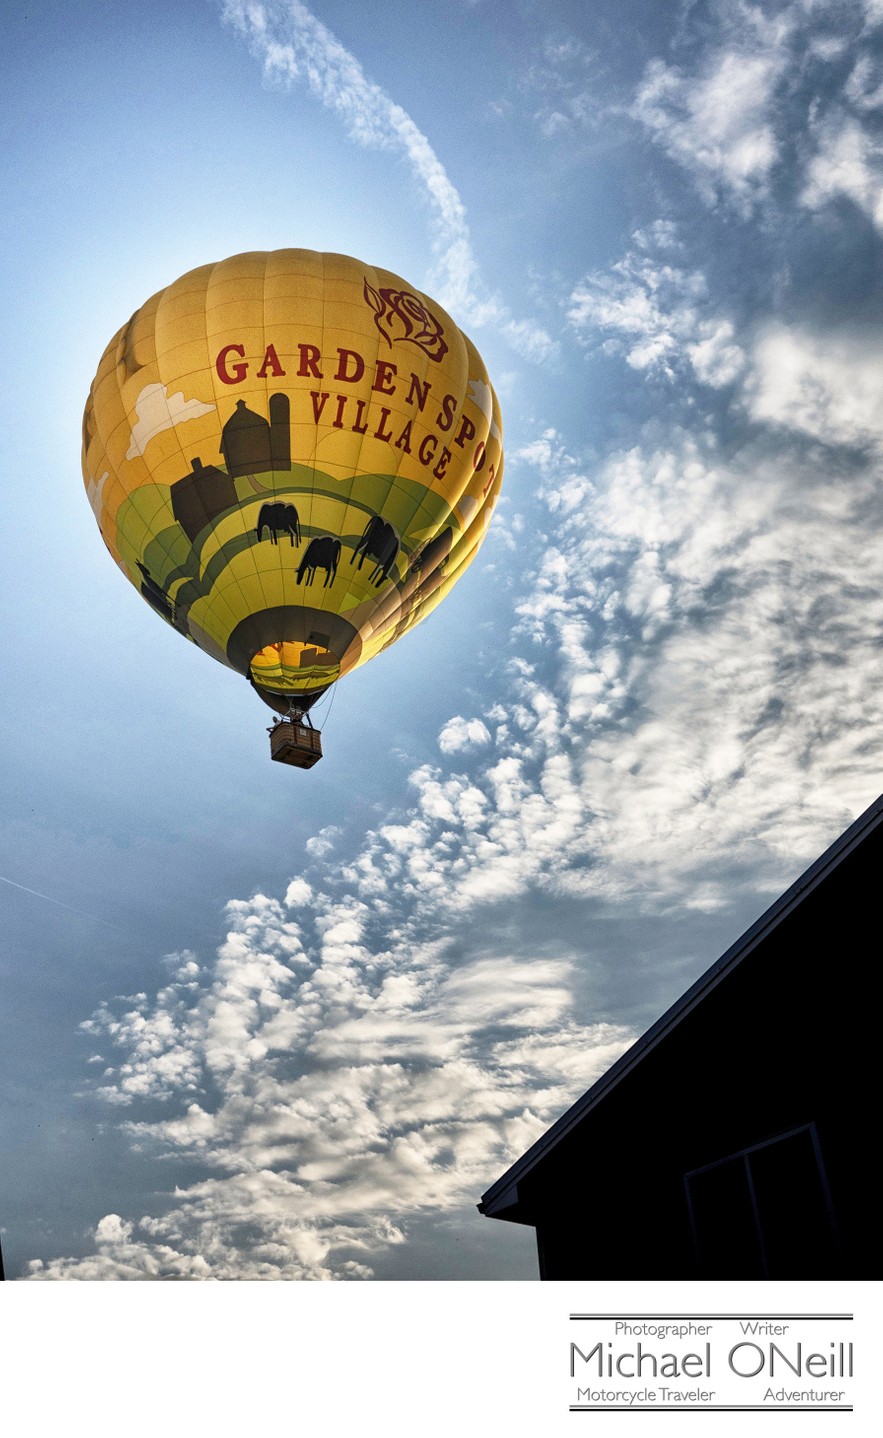 Hot Air Balloon Amish Country Photographer Motorcycle Travel Writer